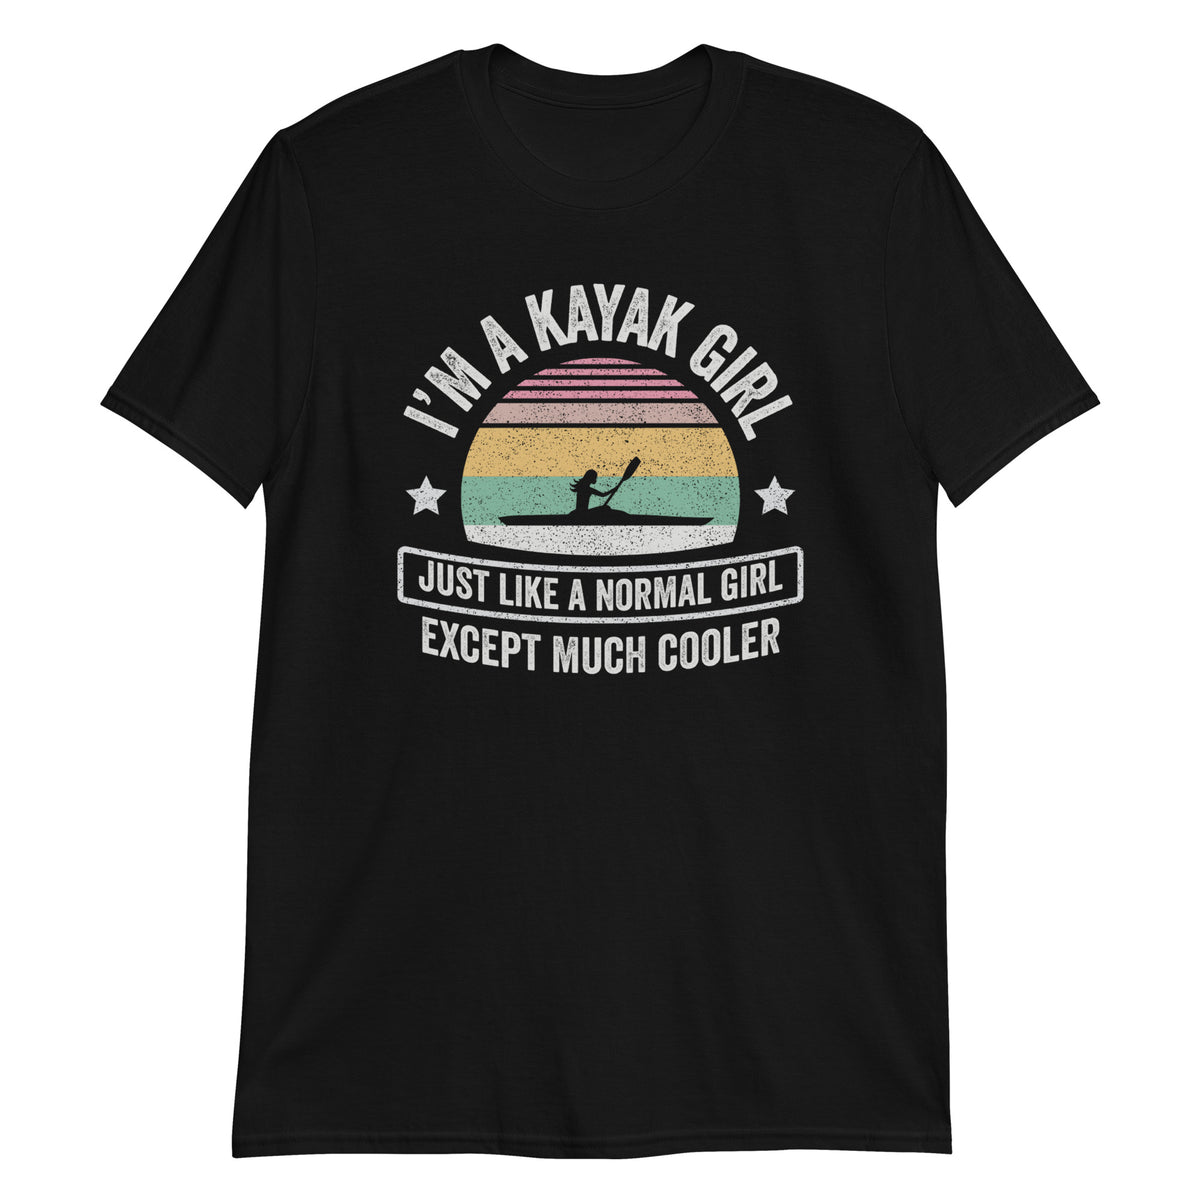 I'm A Kayak Girl Just Like A Normal Girl Except Much Cooler T-Shirt